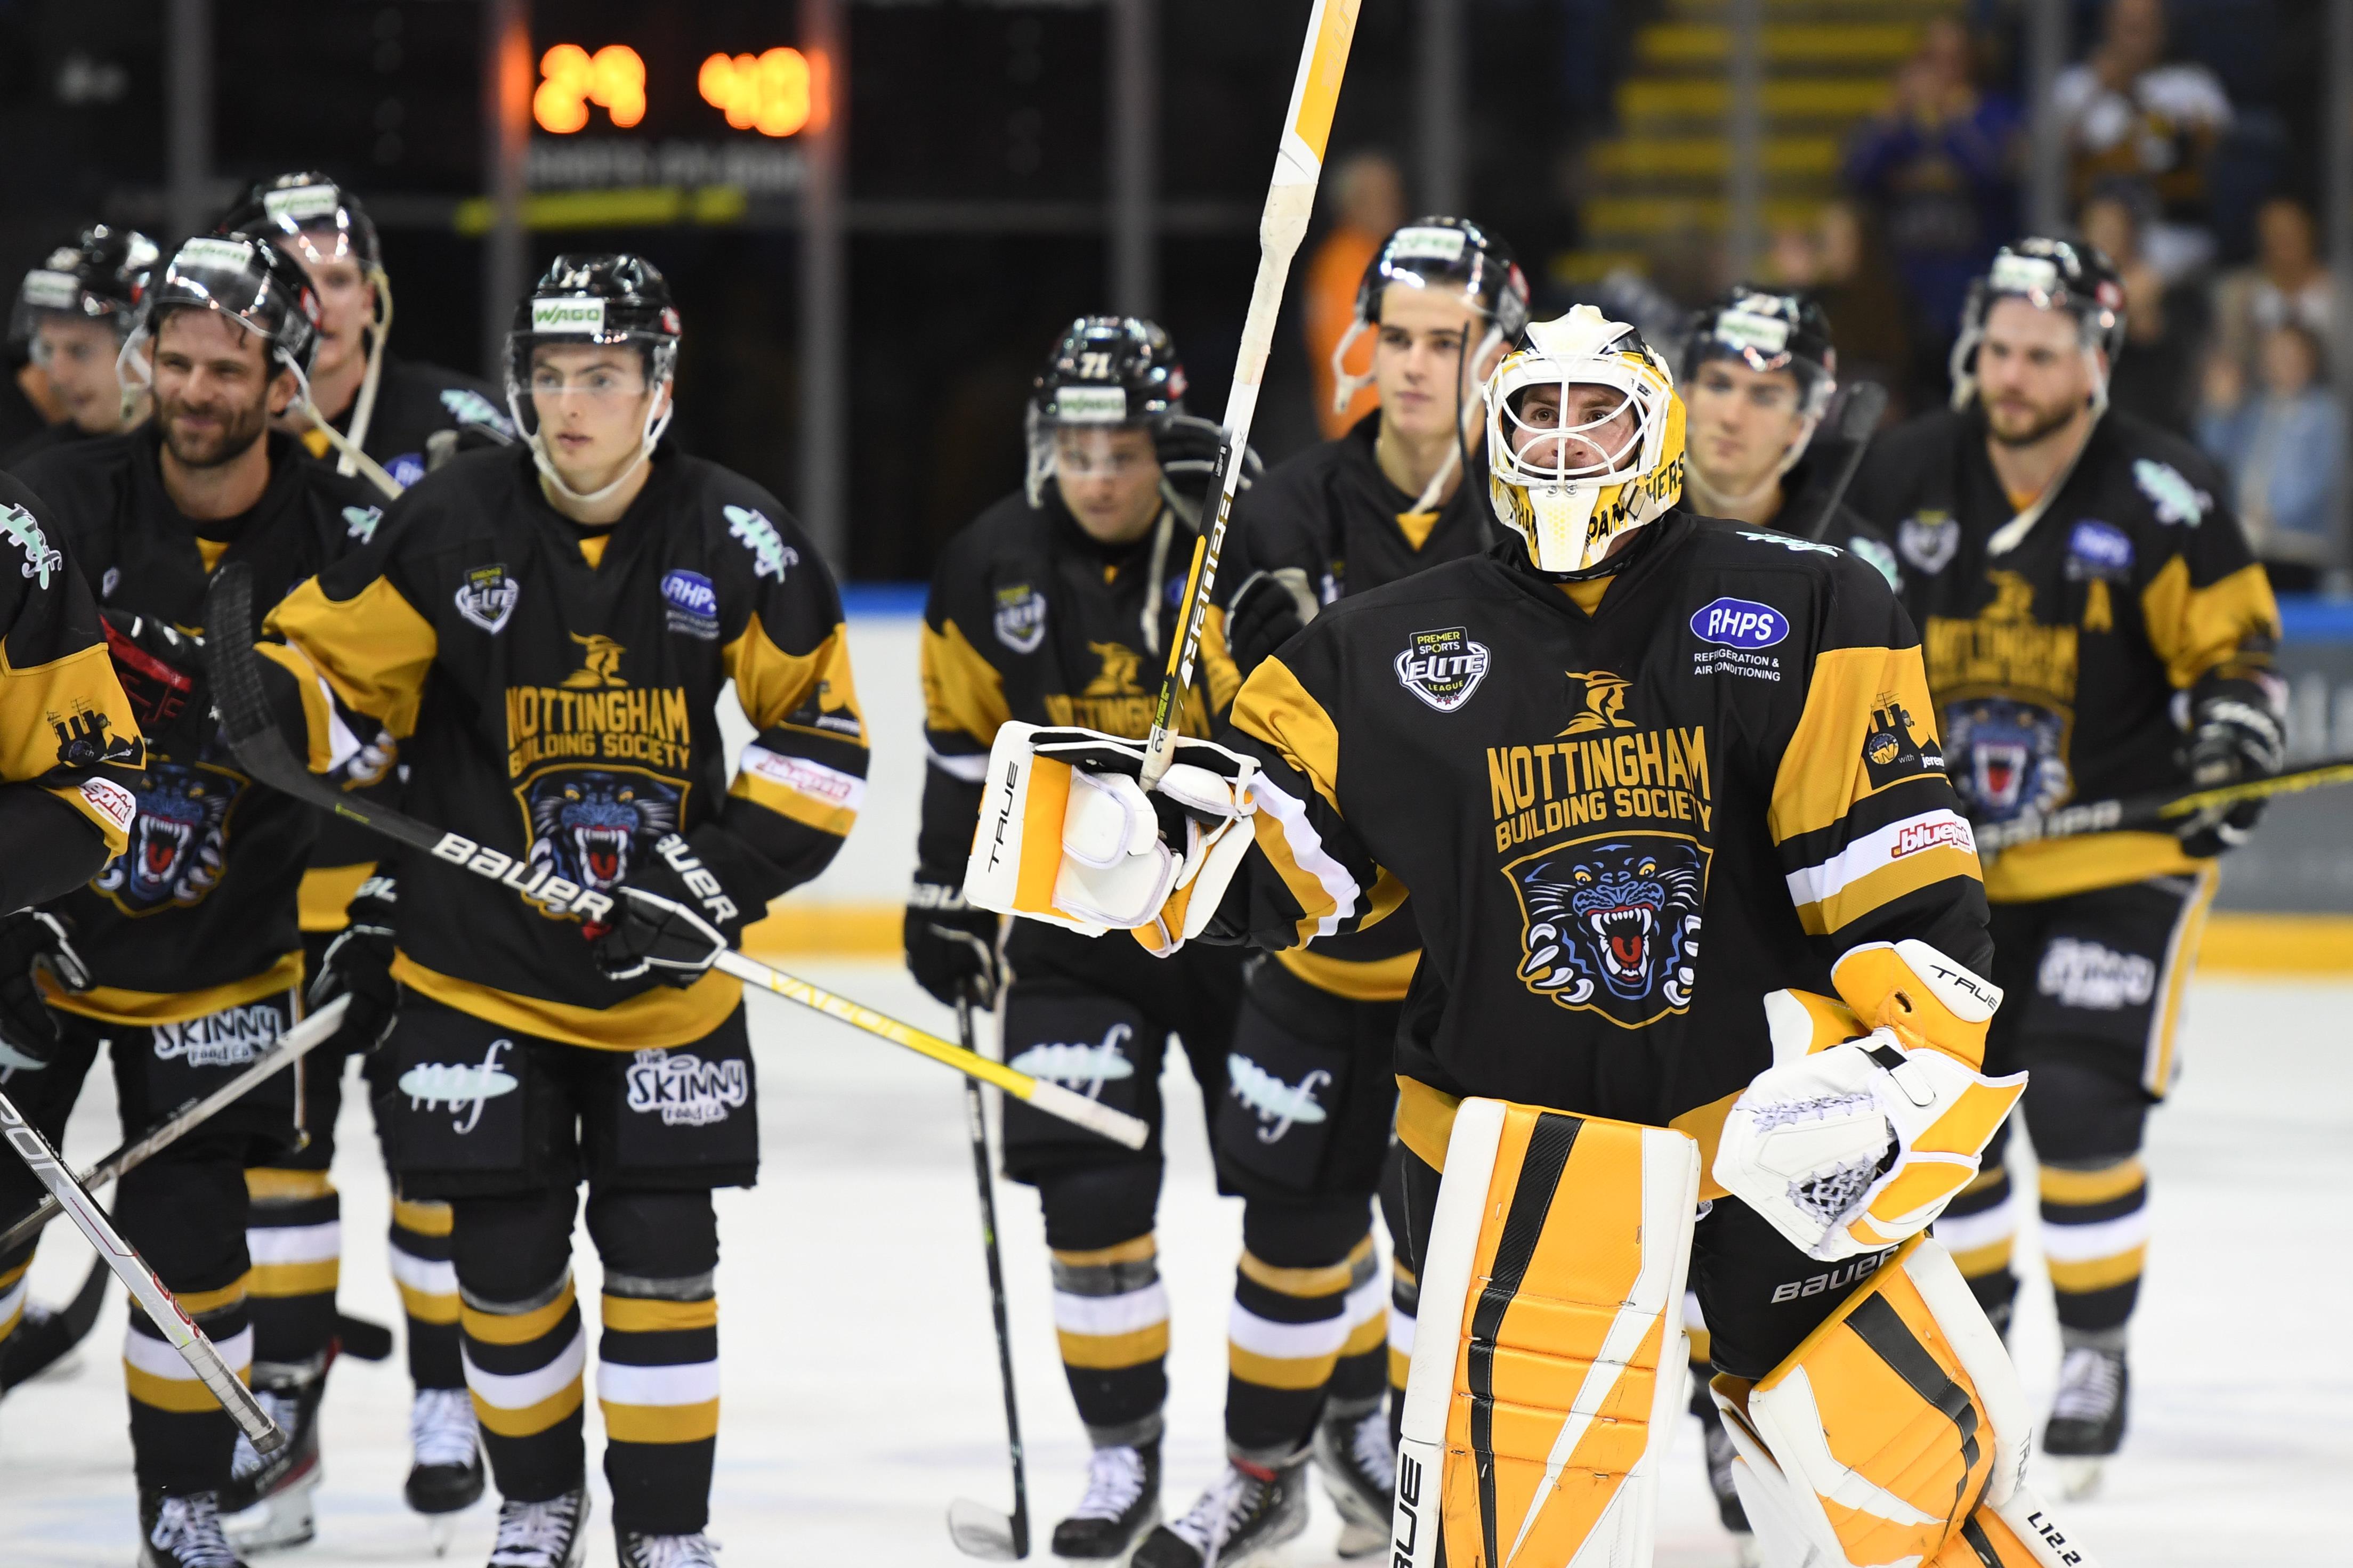 POST-MATCH REACTION FROM WIN OVER STEELERS Top Image